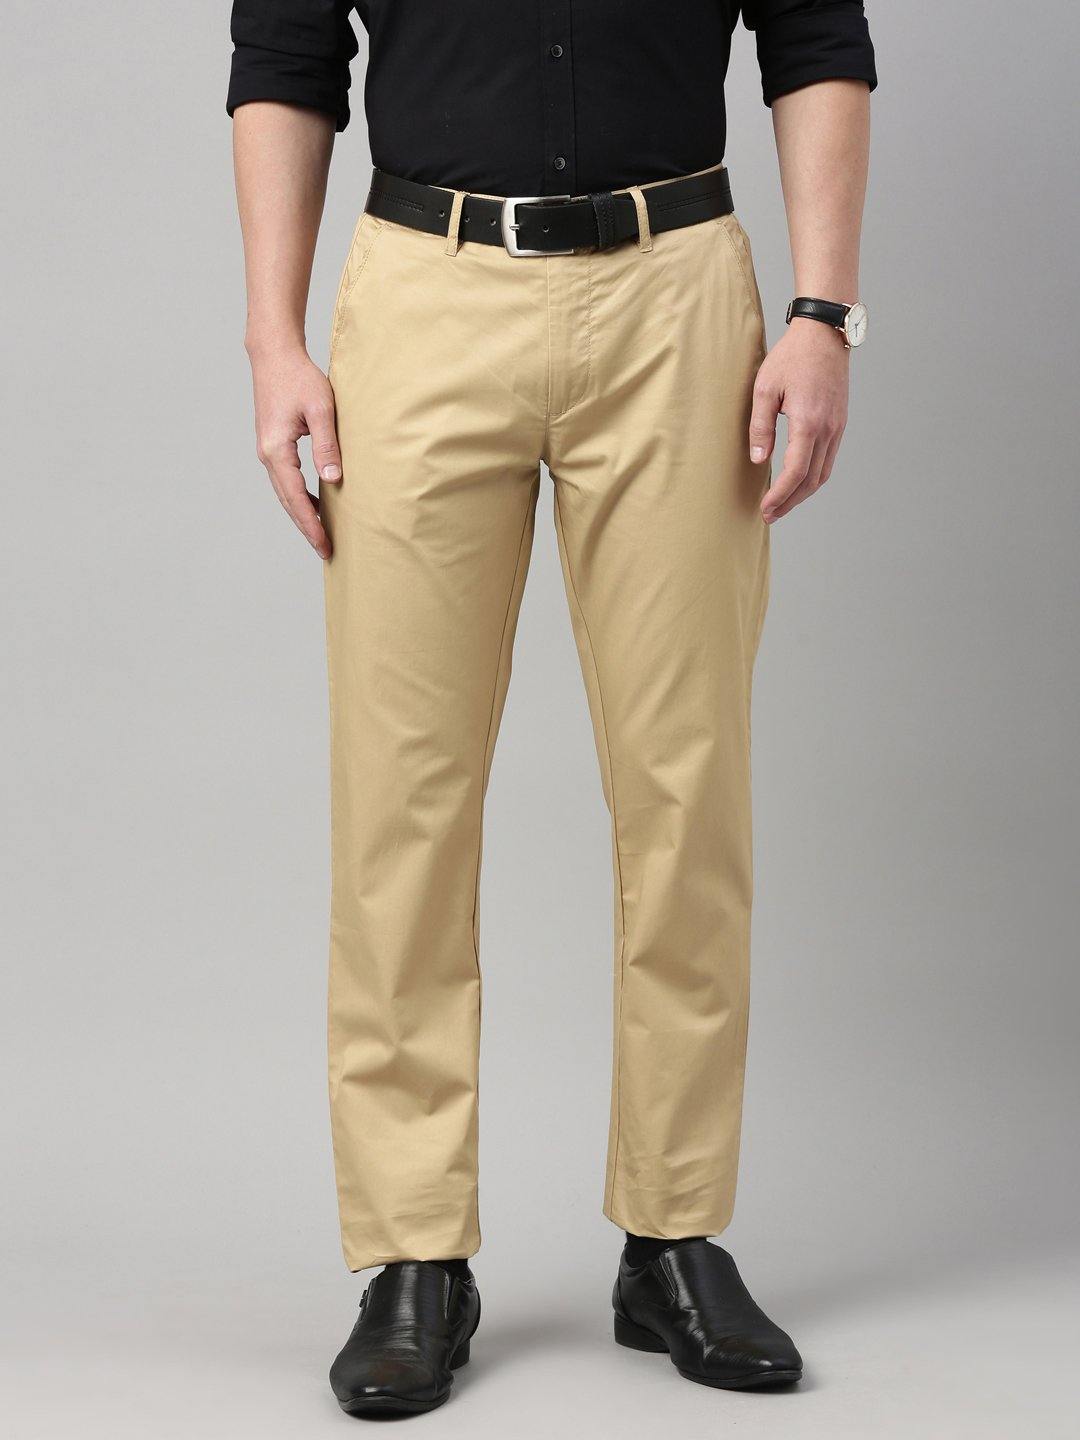 Brown 100 Percent Woven Made Punit Polyfab Mens Cotton Pants Light Weight  And Durable at Best Price in Kolkata  Van Heusen